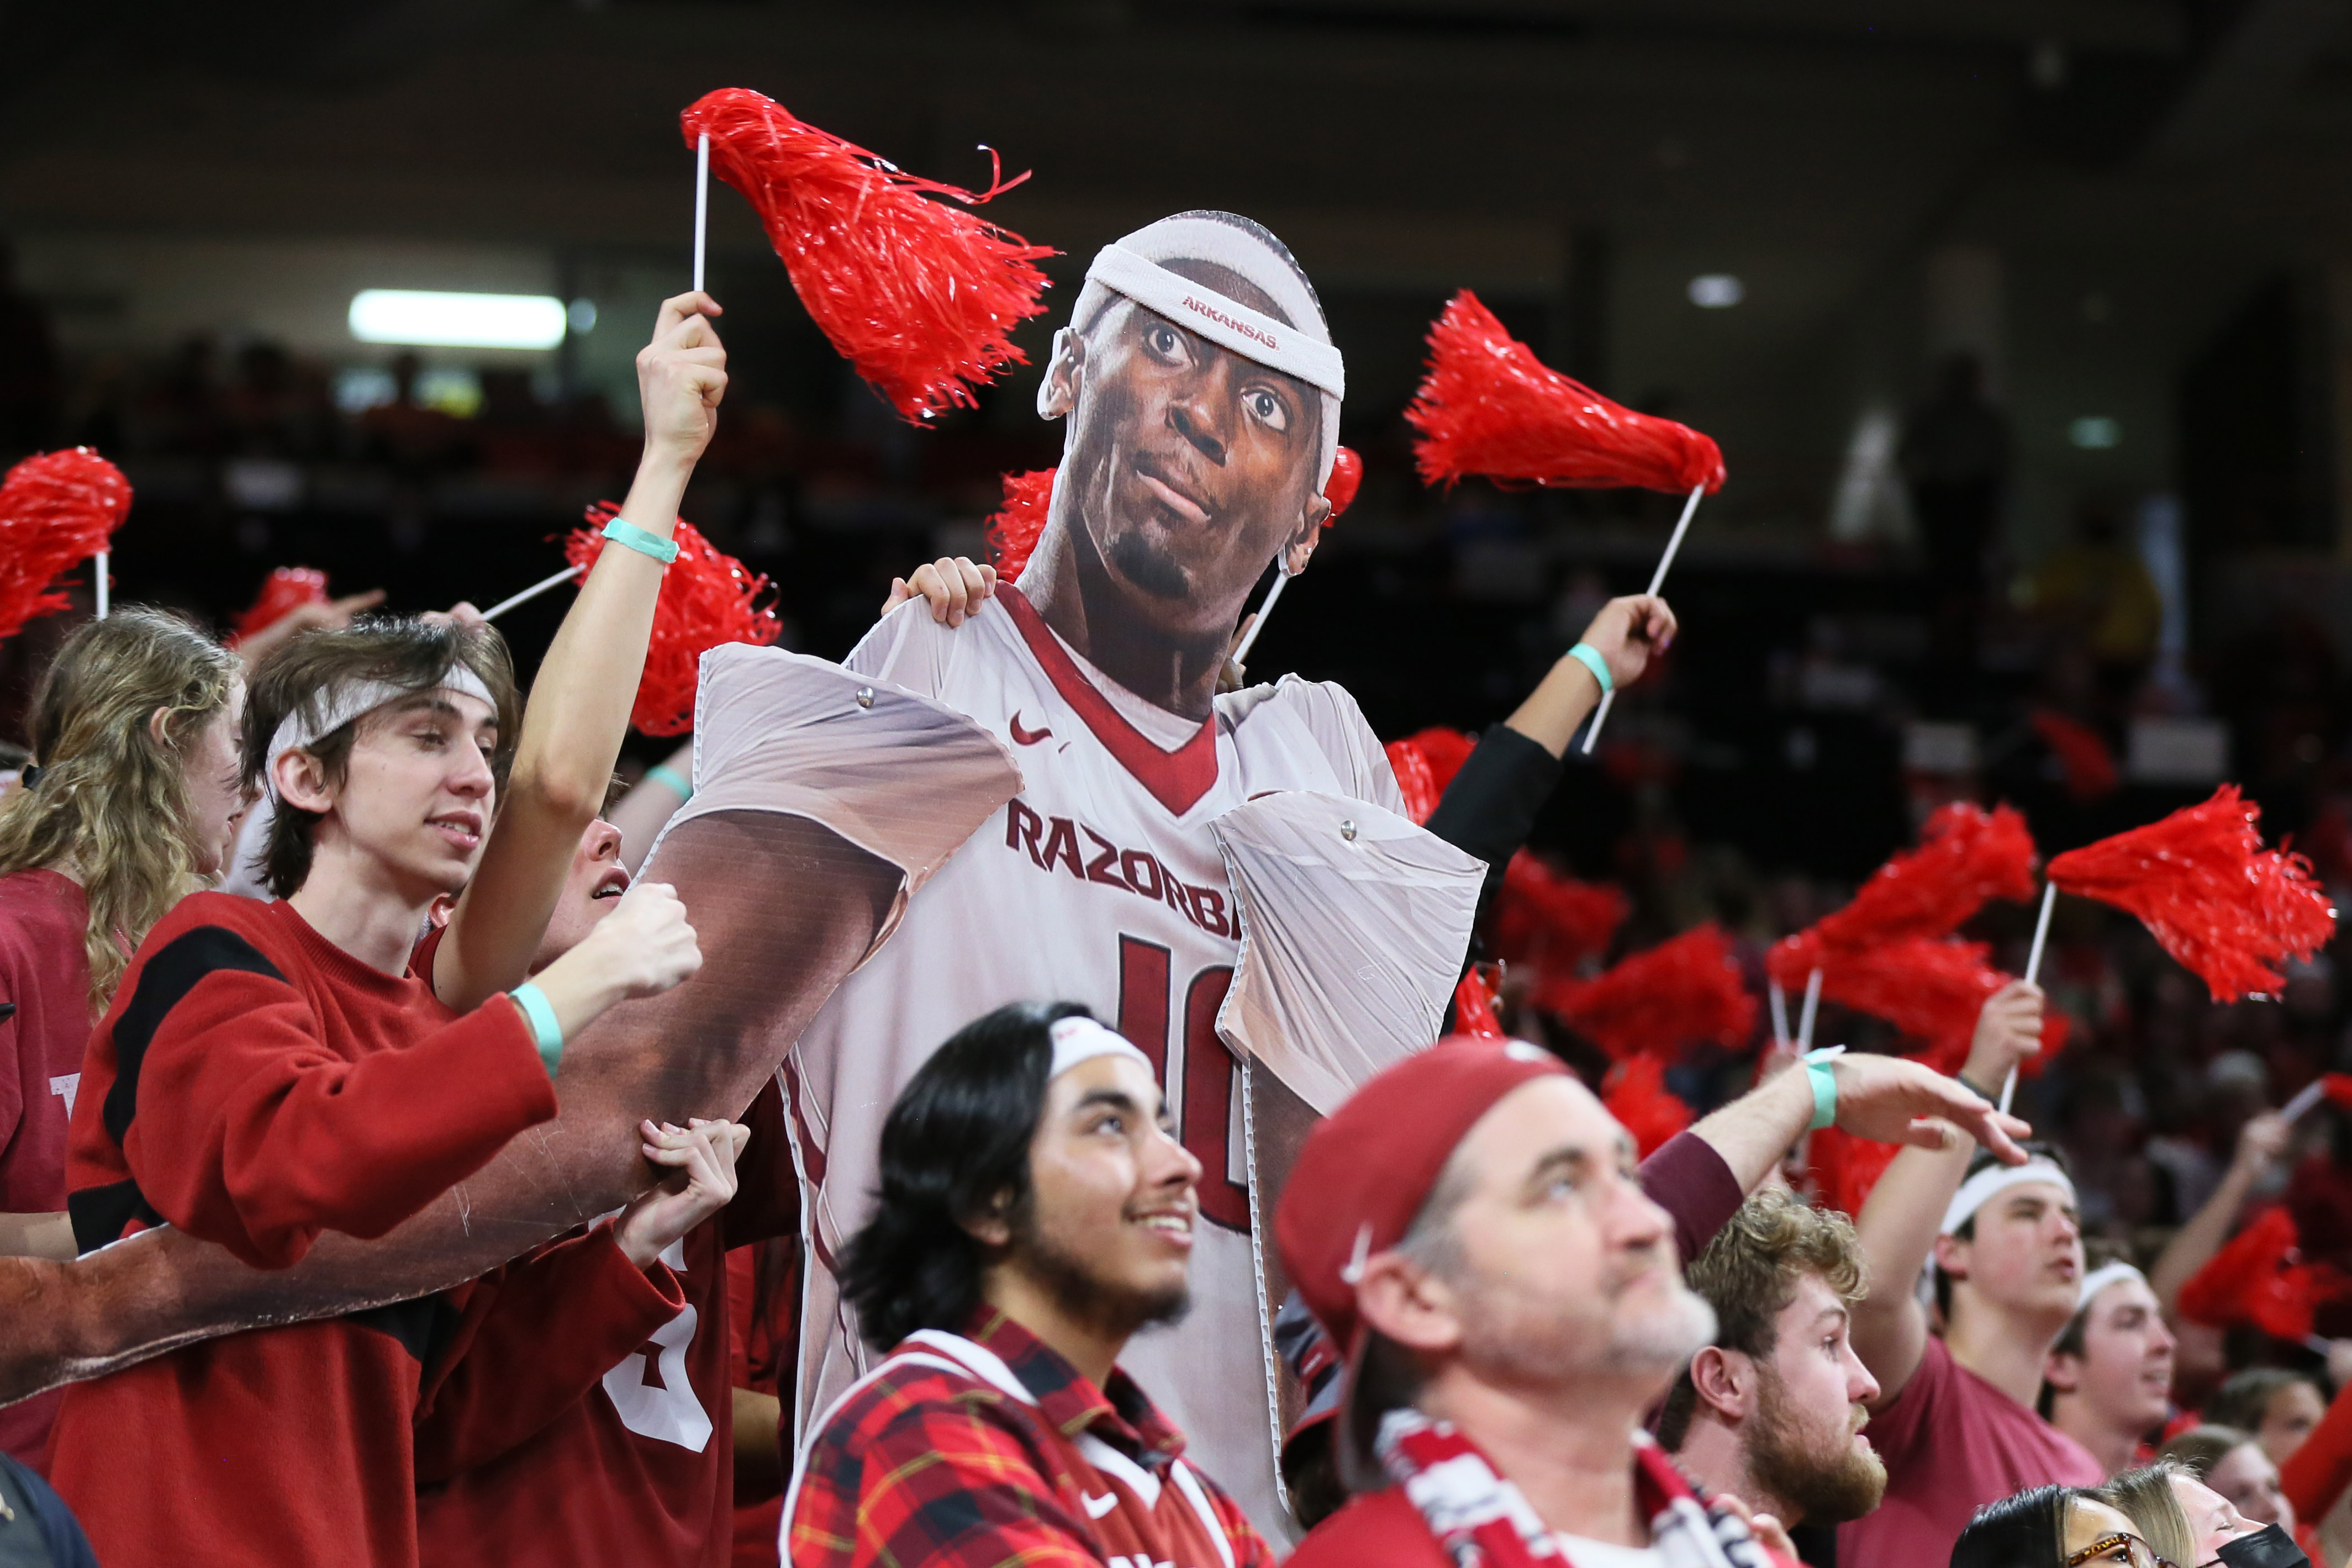 Arkansas fans get into the spirt of Bobby Portis night with a cut-out puppet wearing the Bobby Portis head band given away at the game while also waiving the pom-poms they received for the red-out.